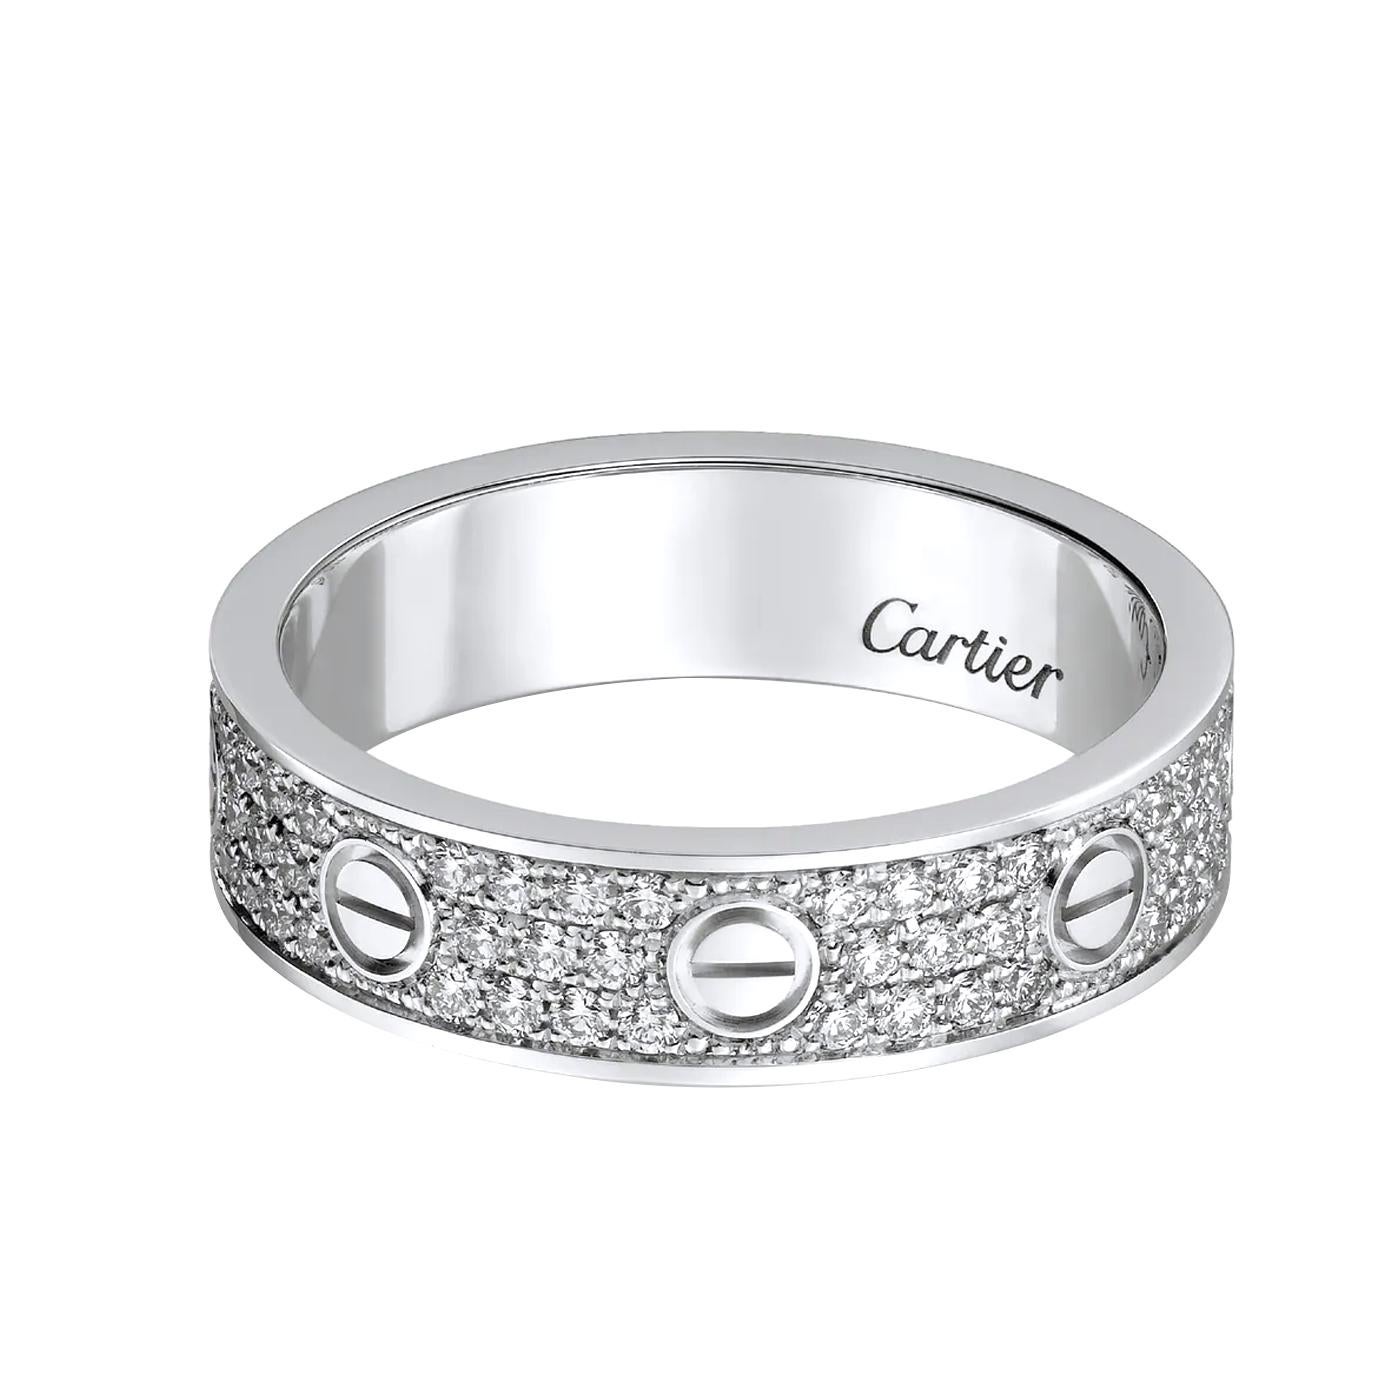 Cartier LOVE wedding band, 18K white gold (750/1000), set with 88 brilliant-cut diamonds totaling 0.31 carats (for size 55).

Details:
Brand: Cartier
Style: Love Ring
Stone: 88 brilliant-cut Paved Diamonds
Carat: 0.31 carats
Material: 18K White